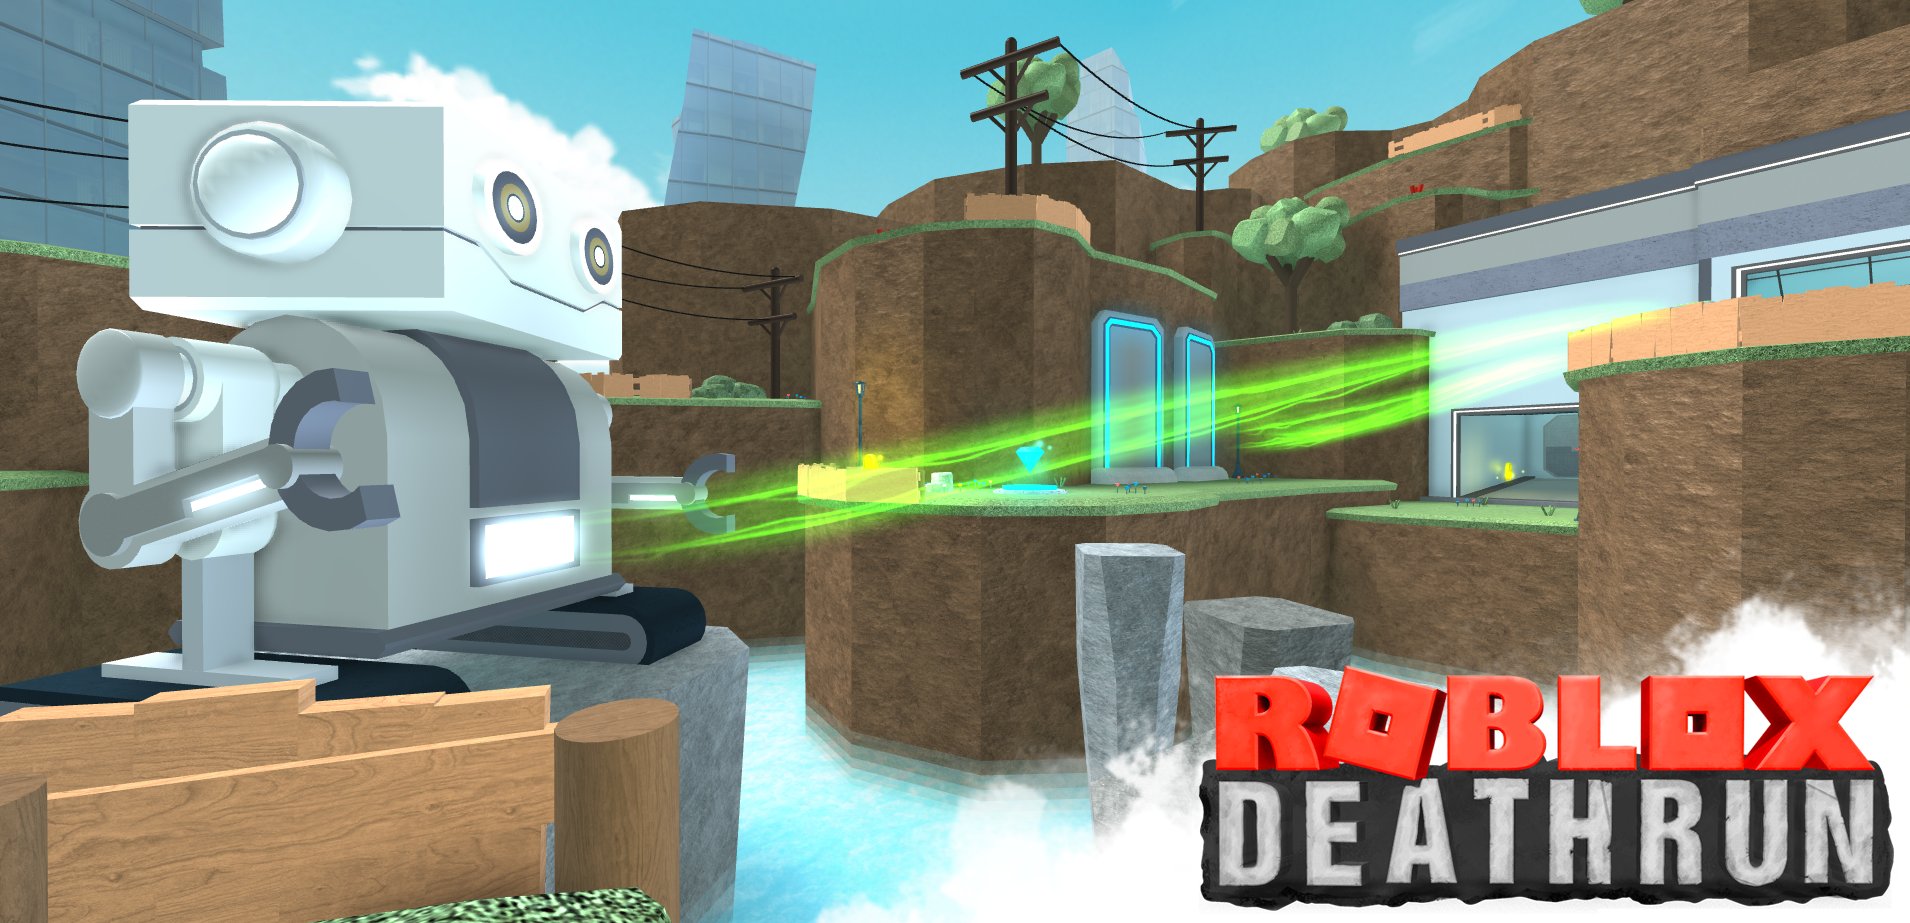 Team Deathrun On Twitter The New Map Electricity Outpost Is Waiting For You Play Roblox Deathrun Here Https T Co Cfvaacfsef - roblox deathrun twitter codes 2018